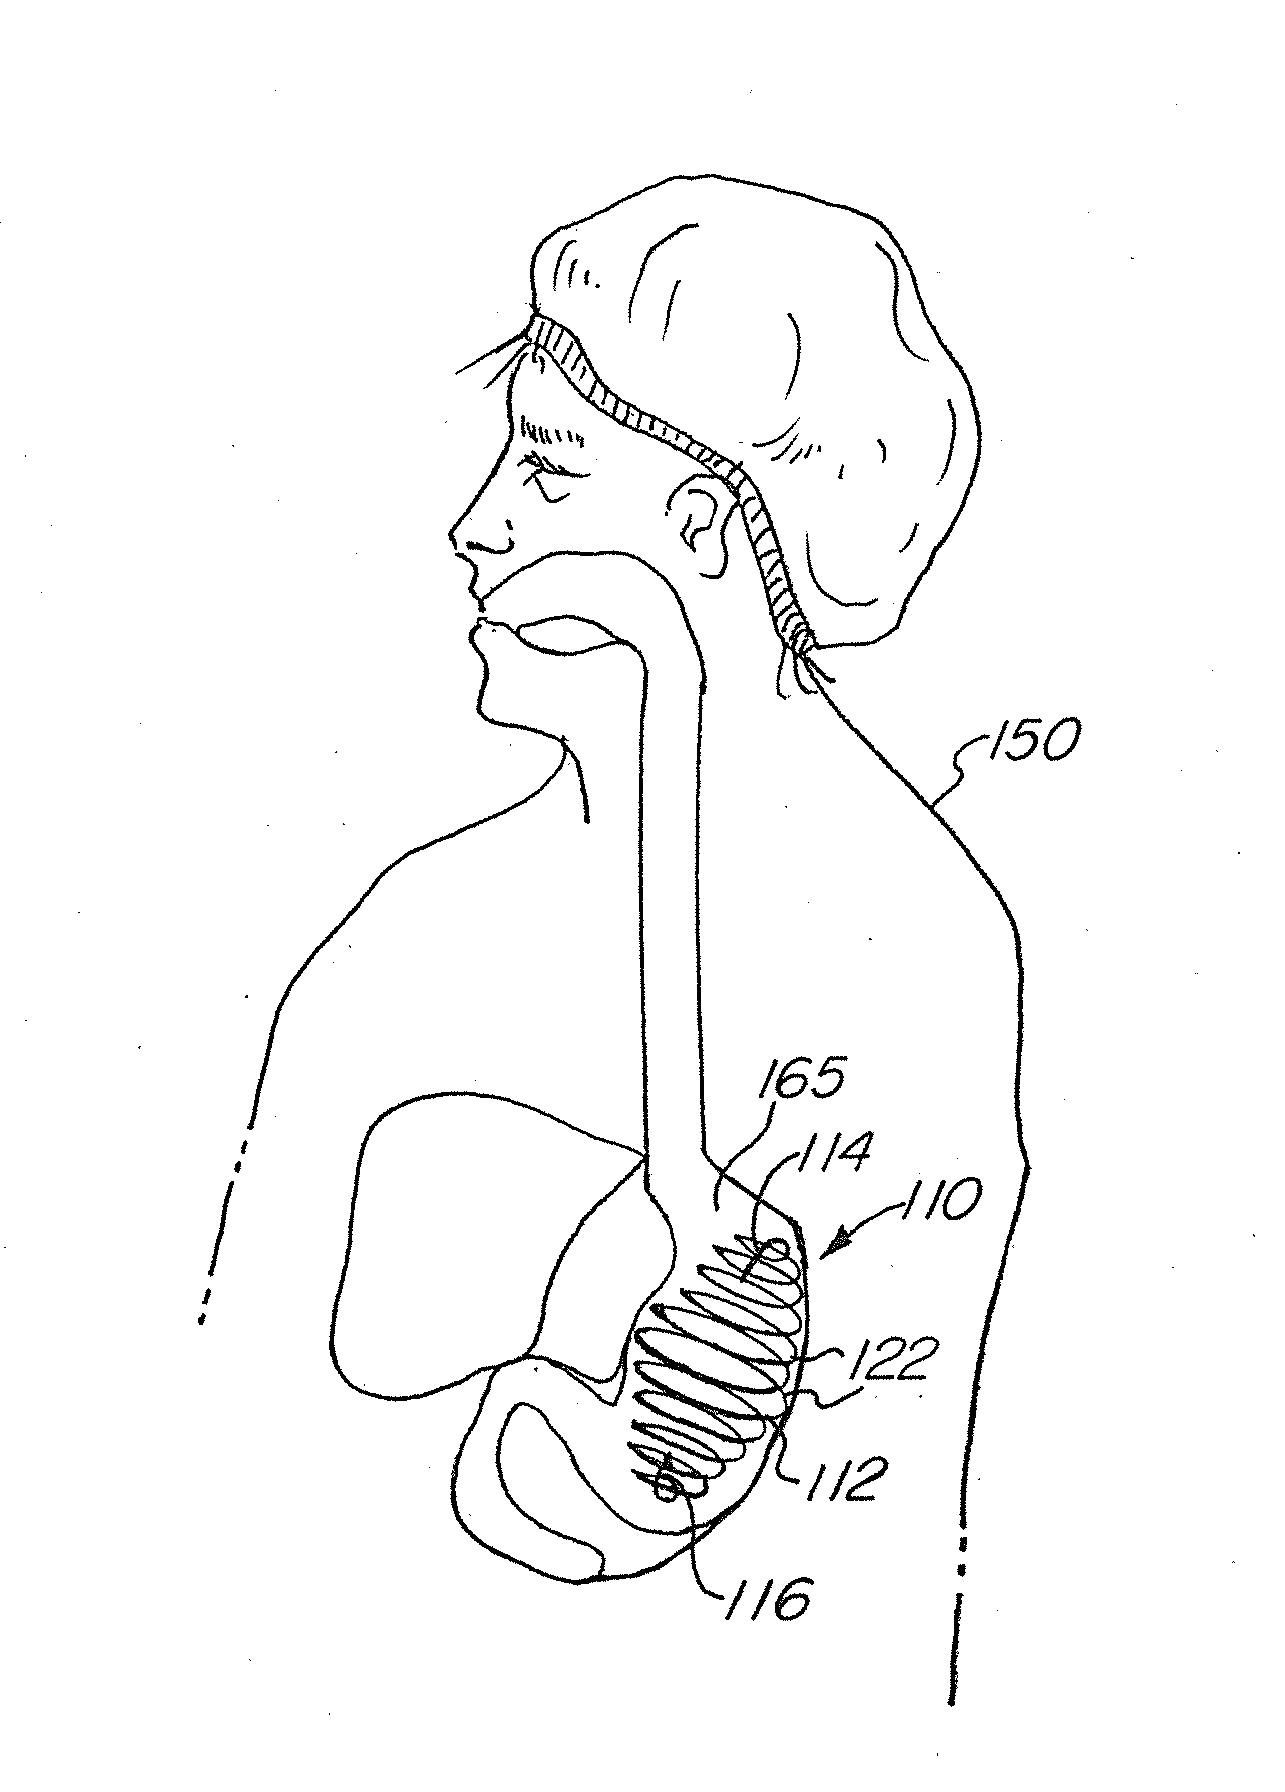 Flexible, self expansible, removable memory coil intragastric device and method of using such device for weight reduction and medication delivery